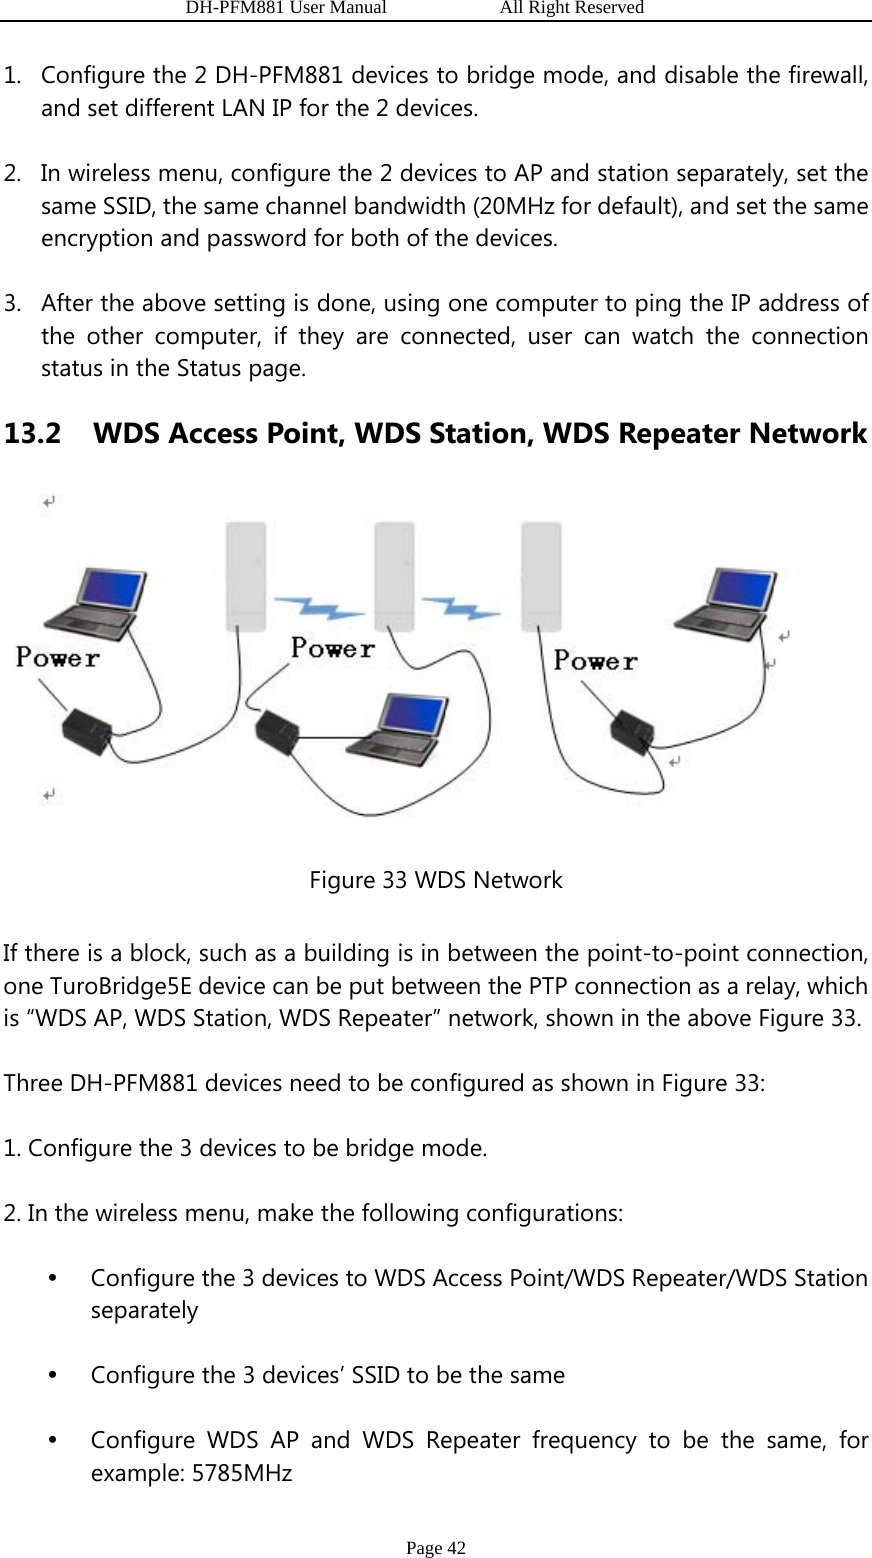                   DH-PFM881 User Manual            All Right Reserved Page 42 1. Configure the 2 DH-PFM881 devices to bridge mode, and disable the firewall, and set different LAN IP for the 2 devices. 2. In wireless menu, configure the 2 devices to AP and station separately, set the same SSID, the same channel bandwidth (20MHz for default), and set the same encryption and password for both of the devices.   3. After the above setting is done, using one computer to ping the IP address of the other computer, if they are connected, user can watch the connection status in the Status page. 13.2   WDS Access Point, WDS Station, WDS Repeater Network  Figure 33 WDS Network If there is a block, such as a building is in between the point-to-point connection, one TuroBridge5E device can be put between the PTP connection as a relay, which is “WDS AP, WDS Station, WDS Repeater” network, shown in the above Figure 33. Three DH-PFM881 devices need to be configured as shown in Figure 33: 1. Configure the 3 devices to be bridge mode. 2. In the wireless menu, make the following configurations: y Configure the 3 devices to WDS Access Point/WDS Repeater/WDS Station separately y Configure the 3 devices’ SSID to be the same y Configure WDS AP and WDS Repeater frequency to be the same, for example: 5785MHz 